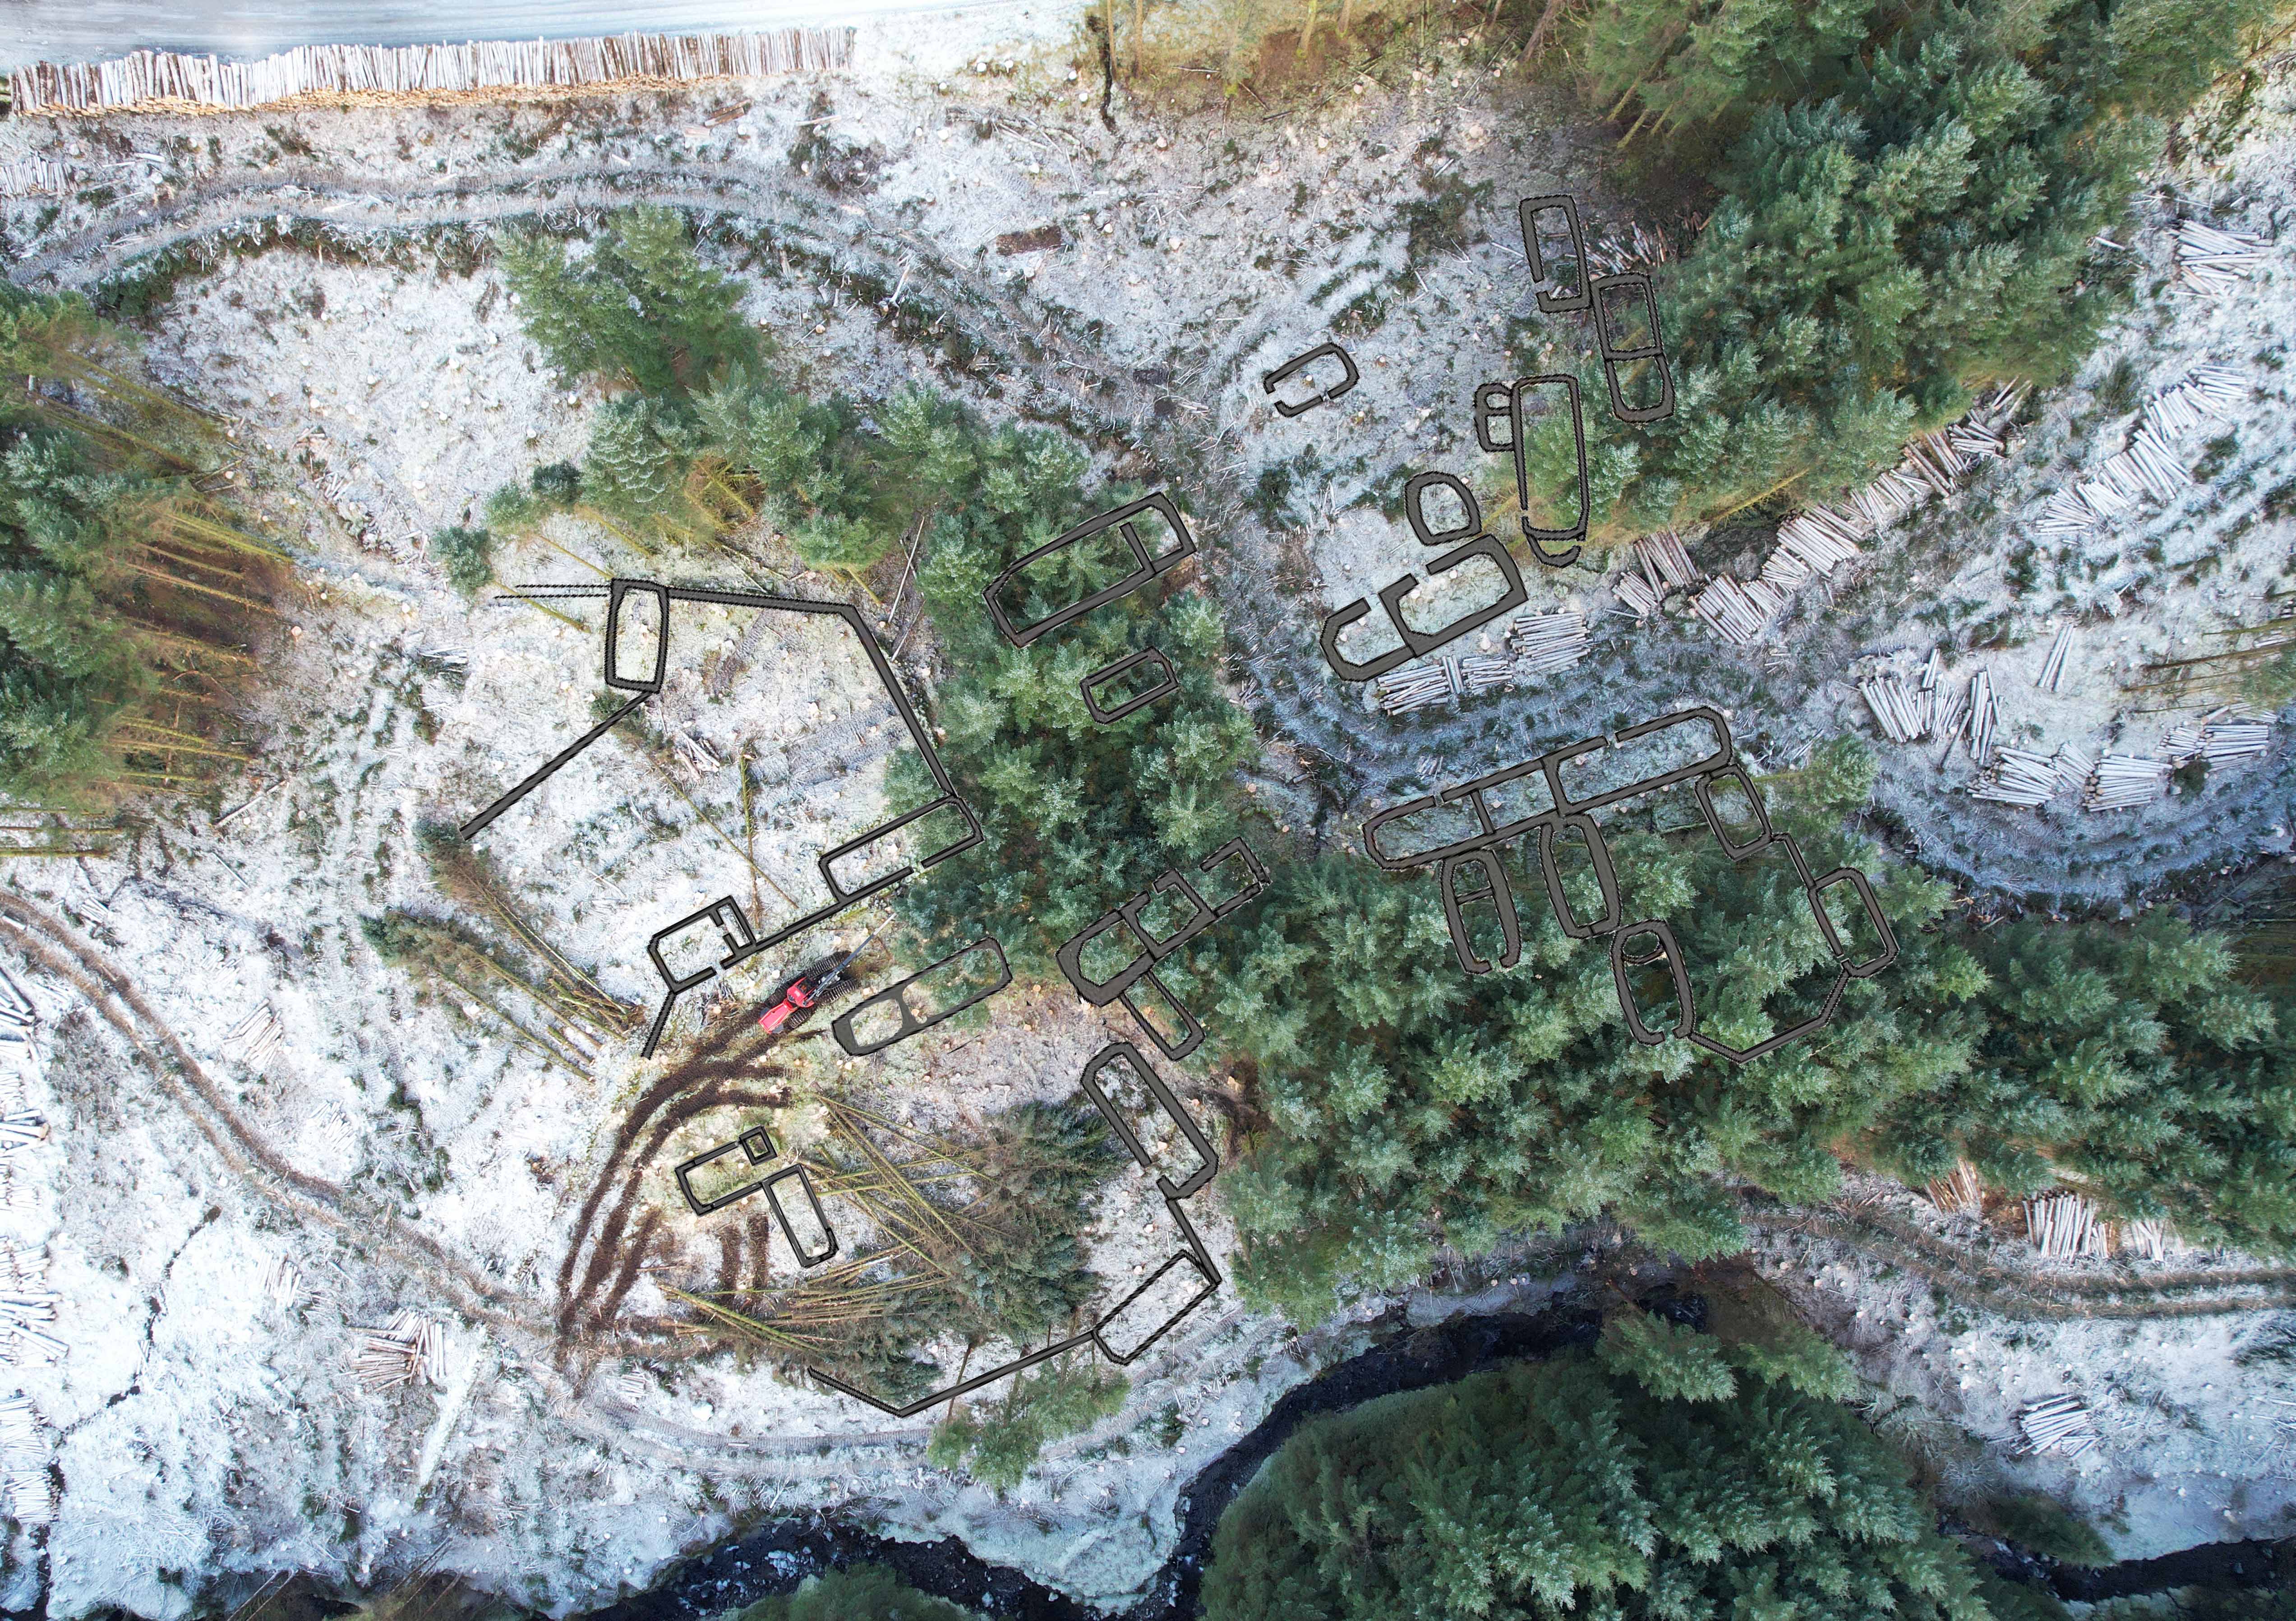 Ariel view of the building in the felling site